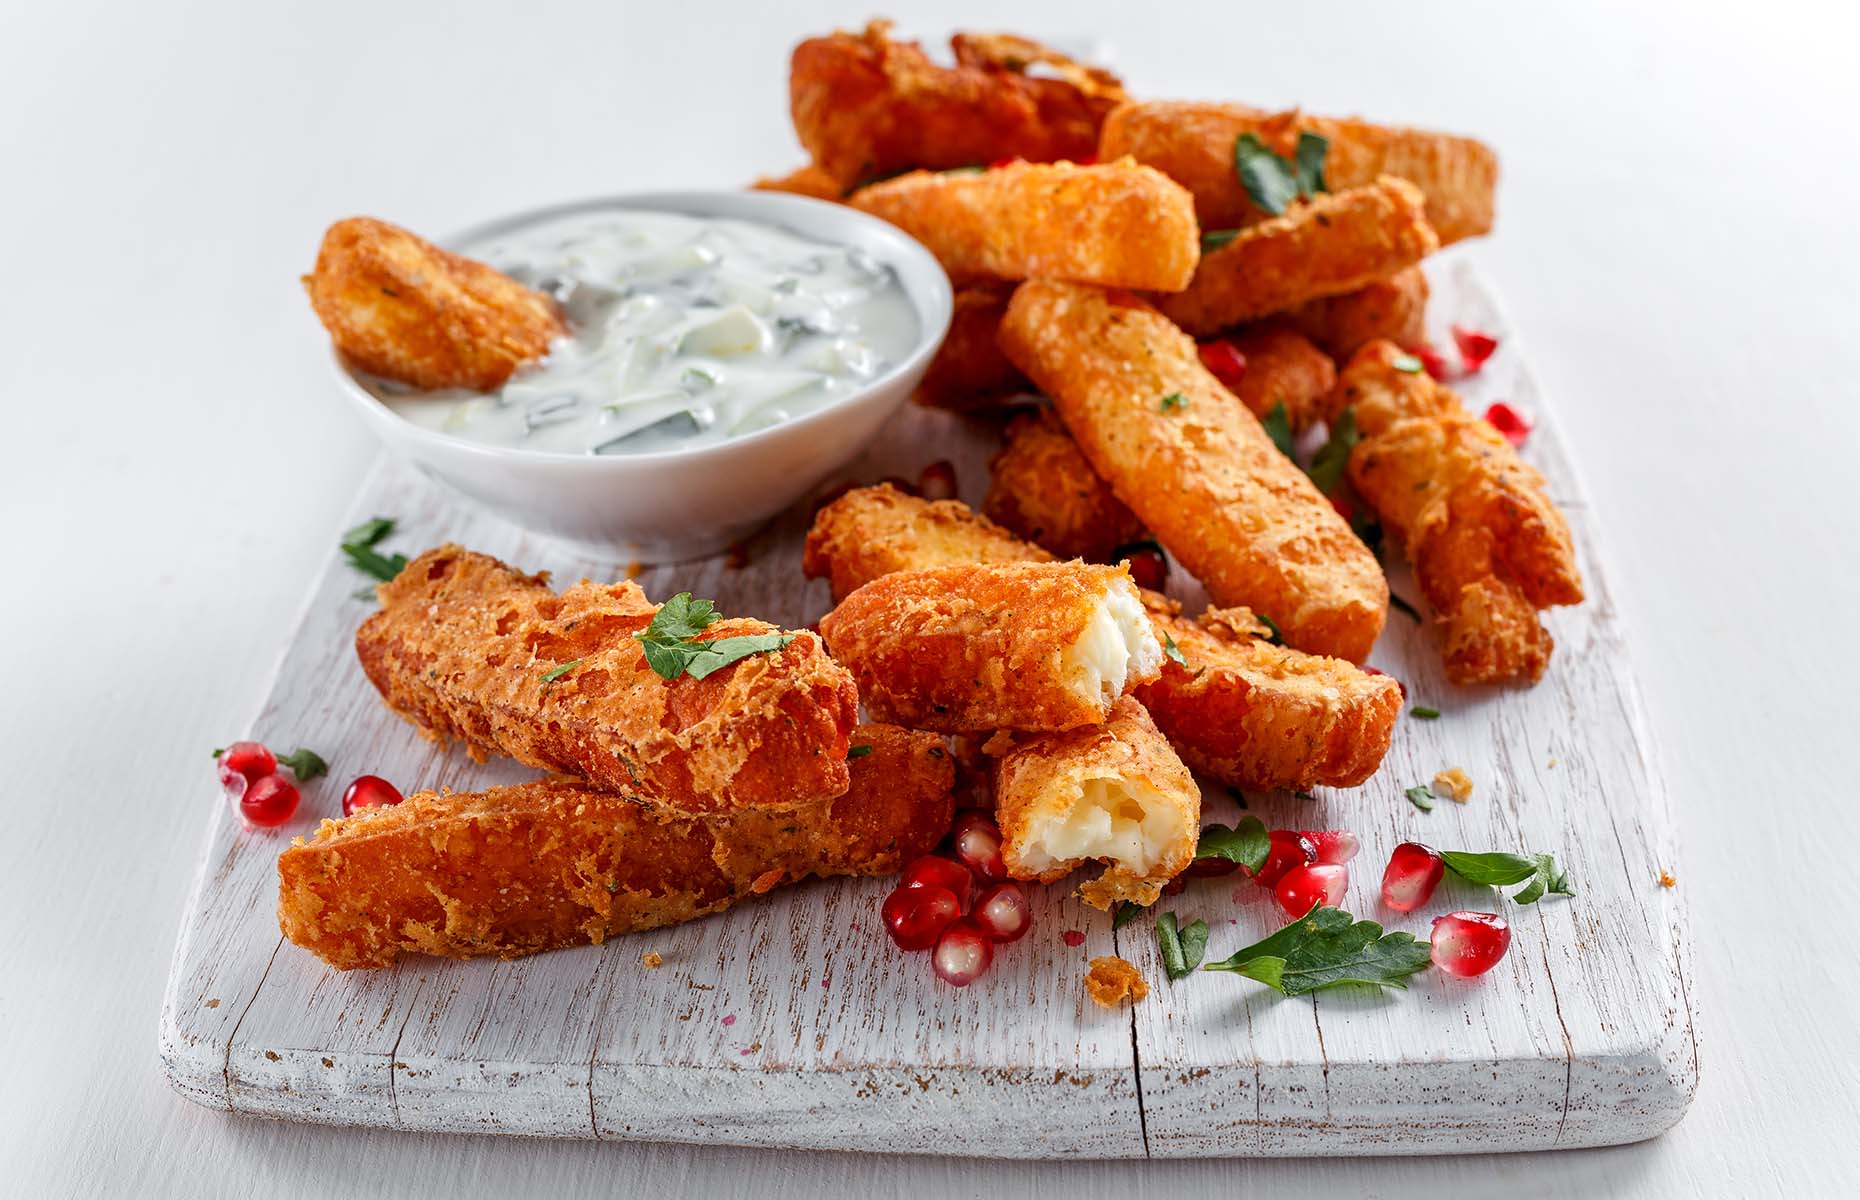 Halloumi fries with a dip (Image: DronG/Shutterstock)